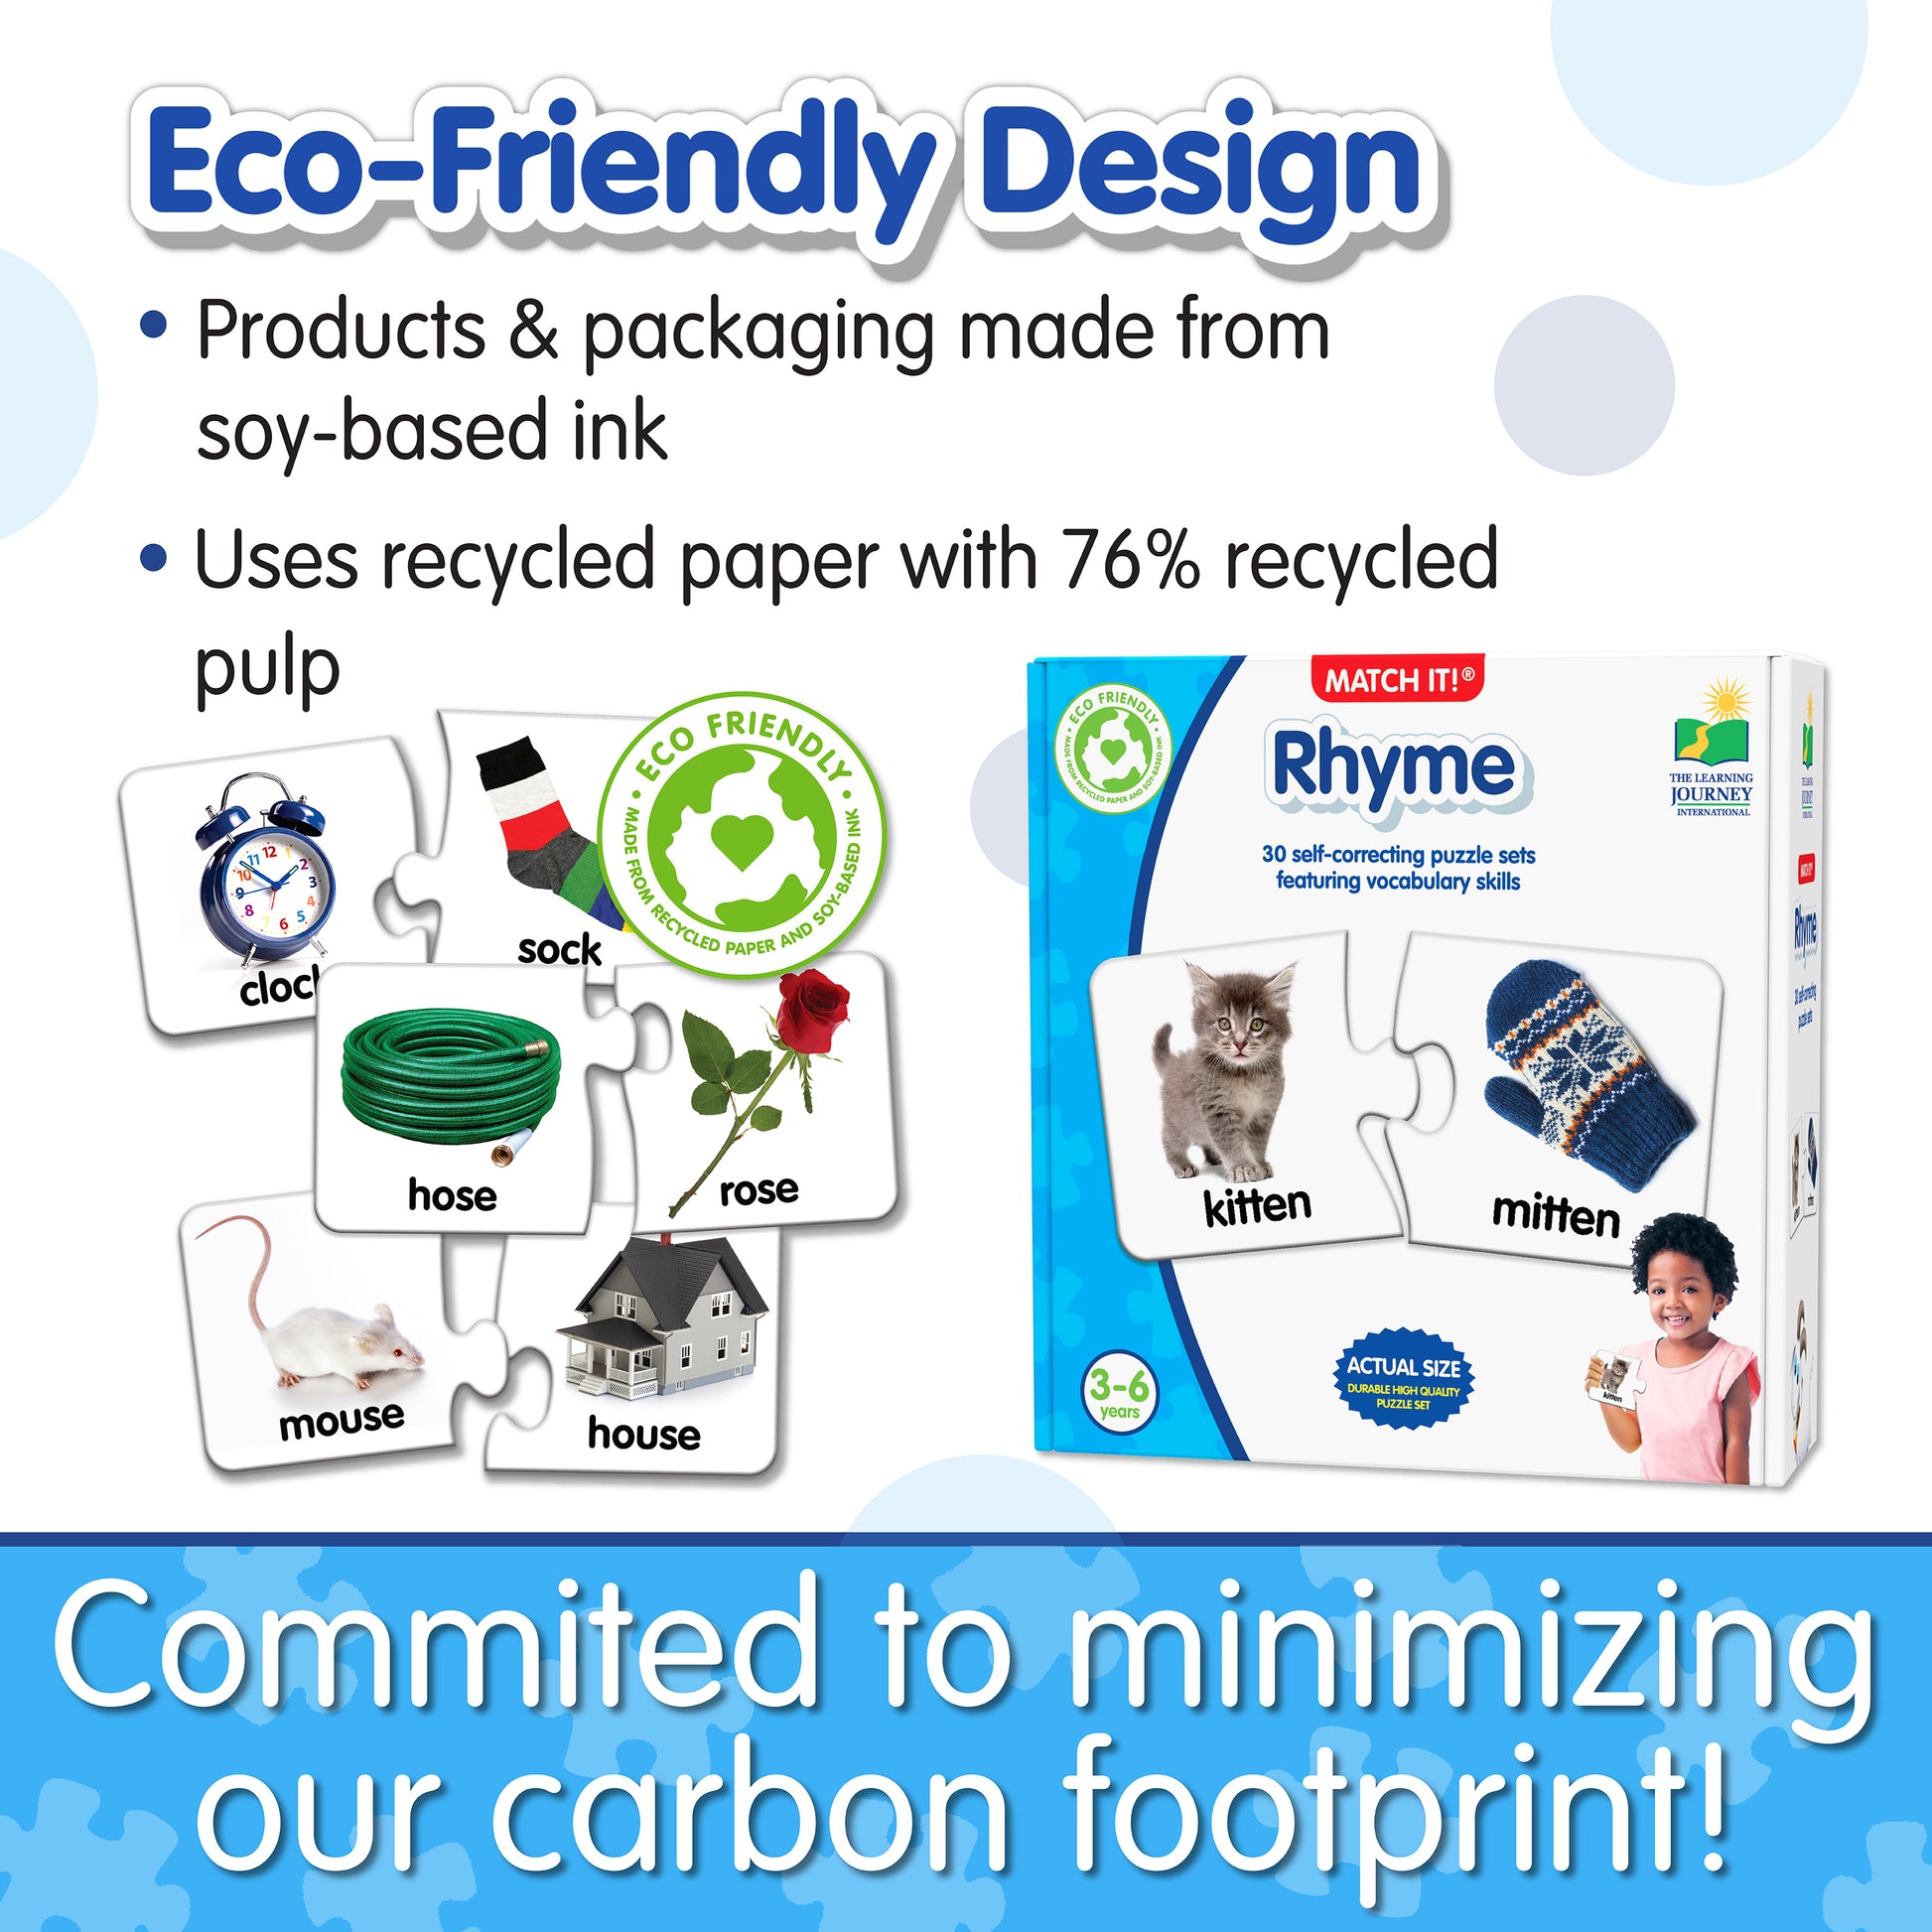 Infographic about Match It - Rhyme's eco-friendly design that says, "Committed to minimizing our carbon footprint!"